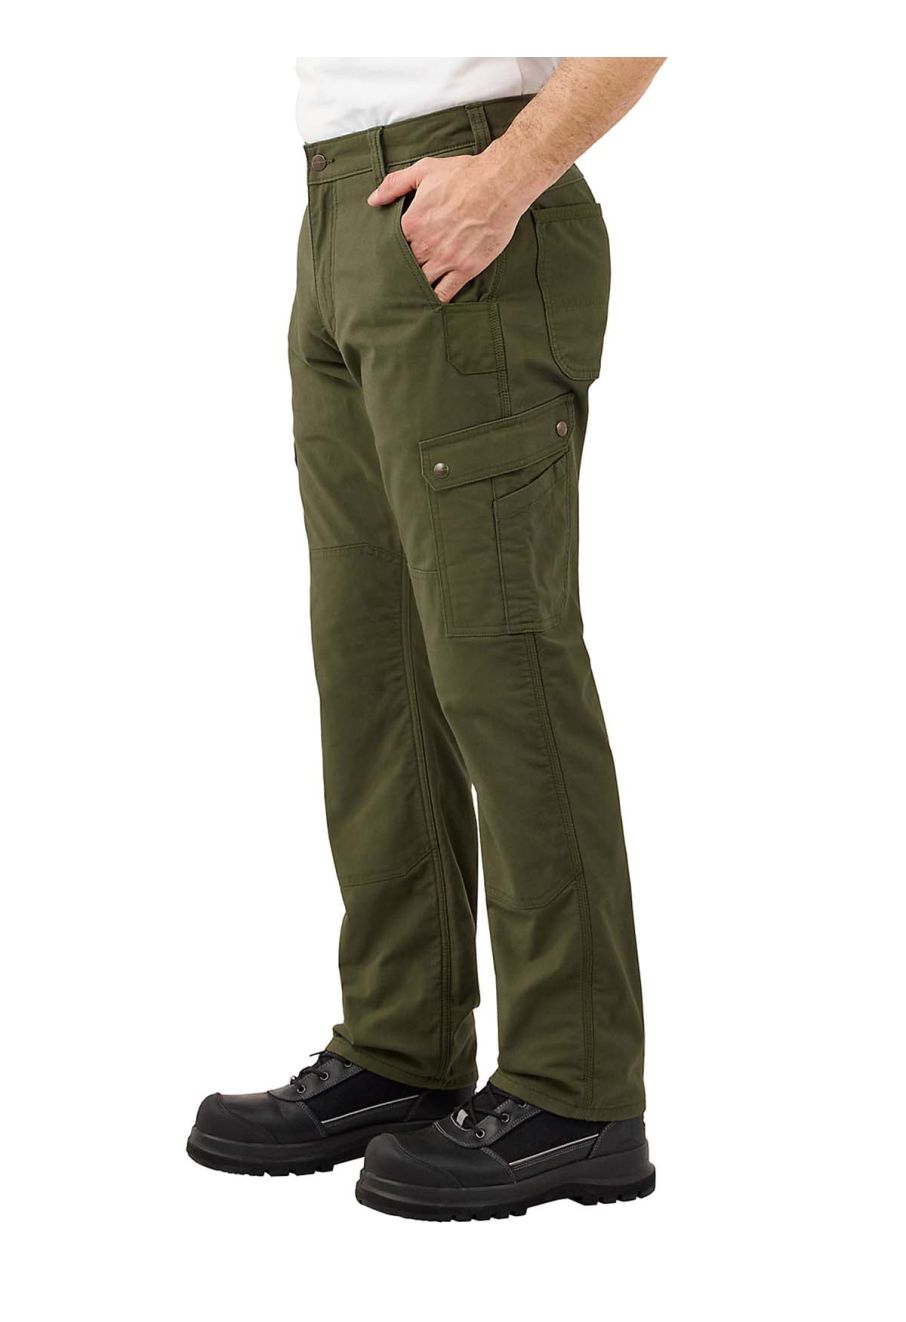 Smiths Workwear Fleece-Lined Mens Big and Tall Relaxed Fit Workwear Pant -  JCPenney